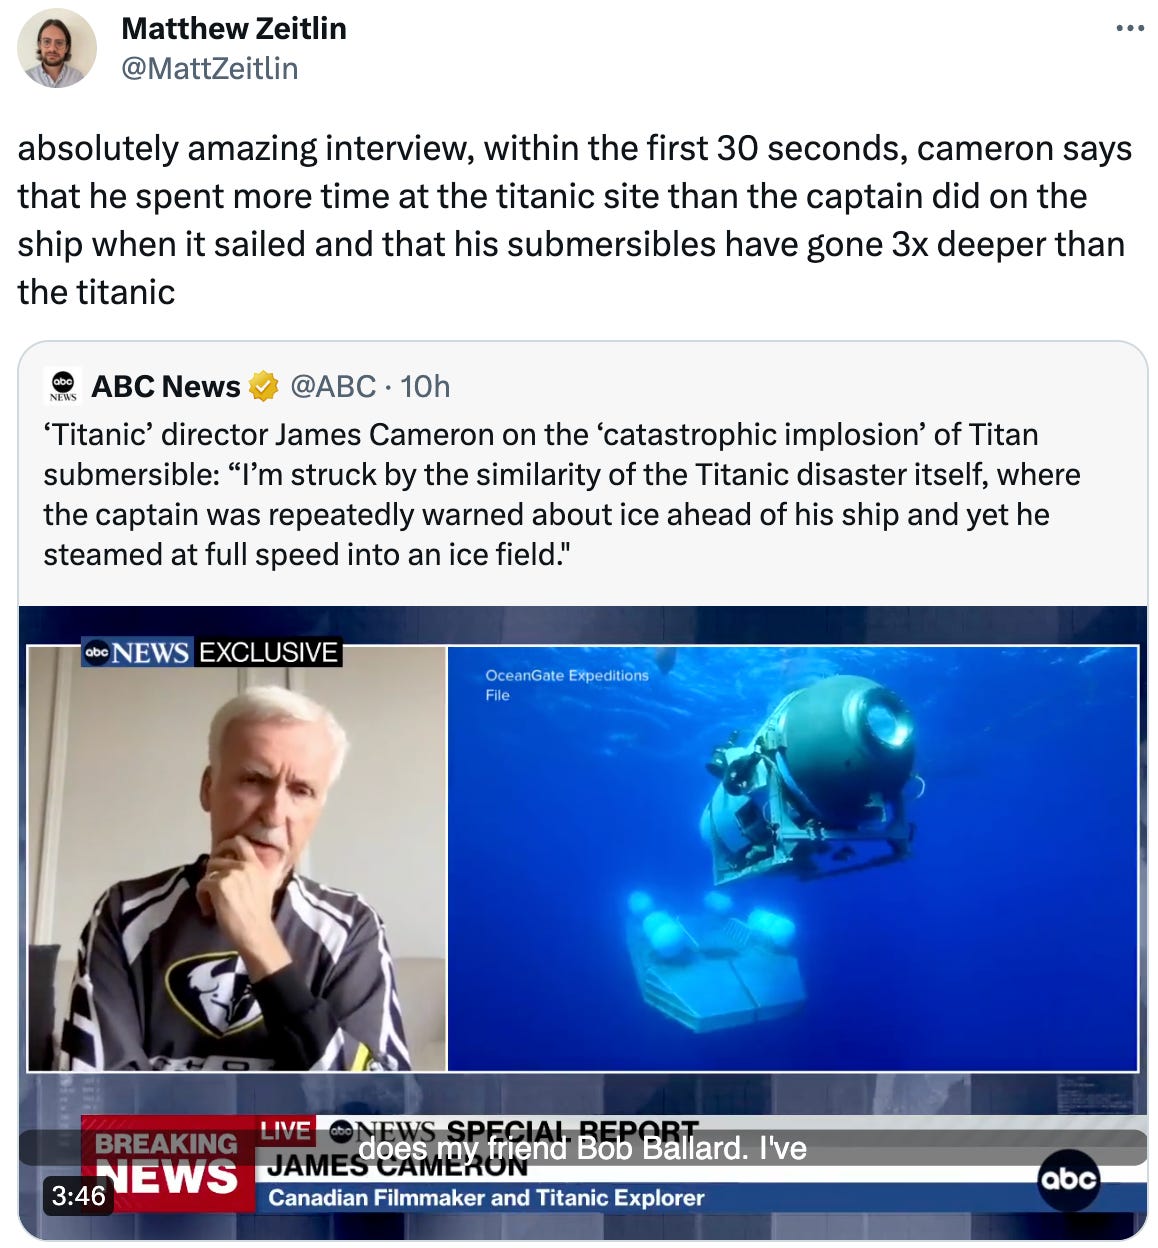  Matthew Zeitlin @MattZeitlin absolutely amazing interview, within the first 30 seconds, cameron says that he spent more time at the titanic site than the captain did on the ship when it sailed and that his submersibles have gone 3x deeper than the titanic Quote Tweet ABC News @ABC · 10h ‘Titanic’ director James Cameron on the ‘catastrophic implosion’ of Titan submersible: “I’m struck by the similarity of the Titanic disaster itself, where the captain was repeatedly warned about ice ahead of his ship and yet he steamed at full speed into an ice field."